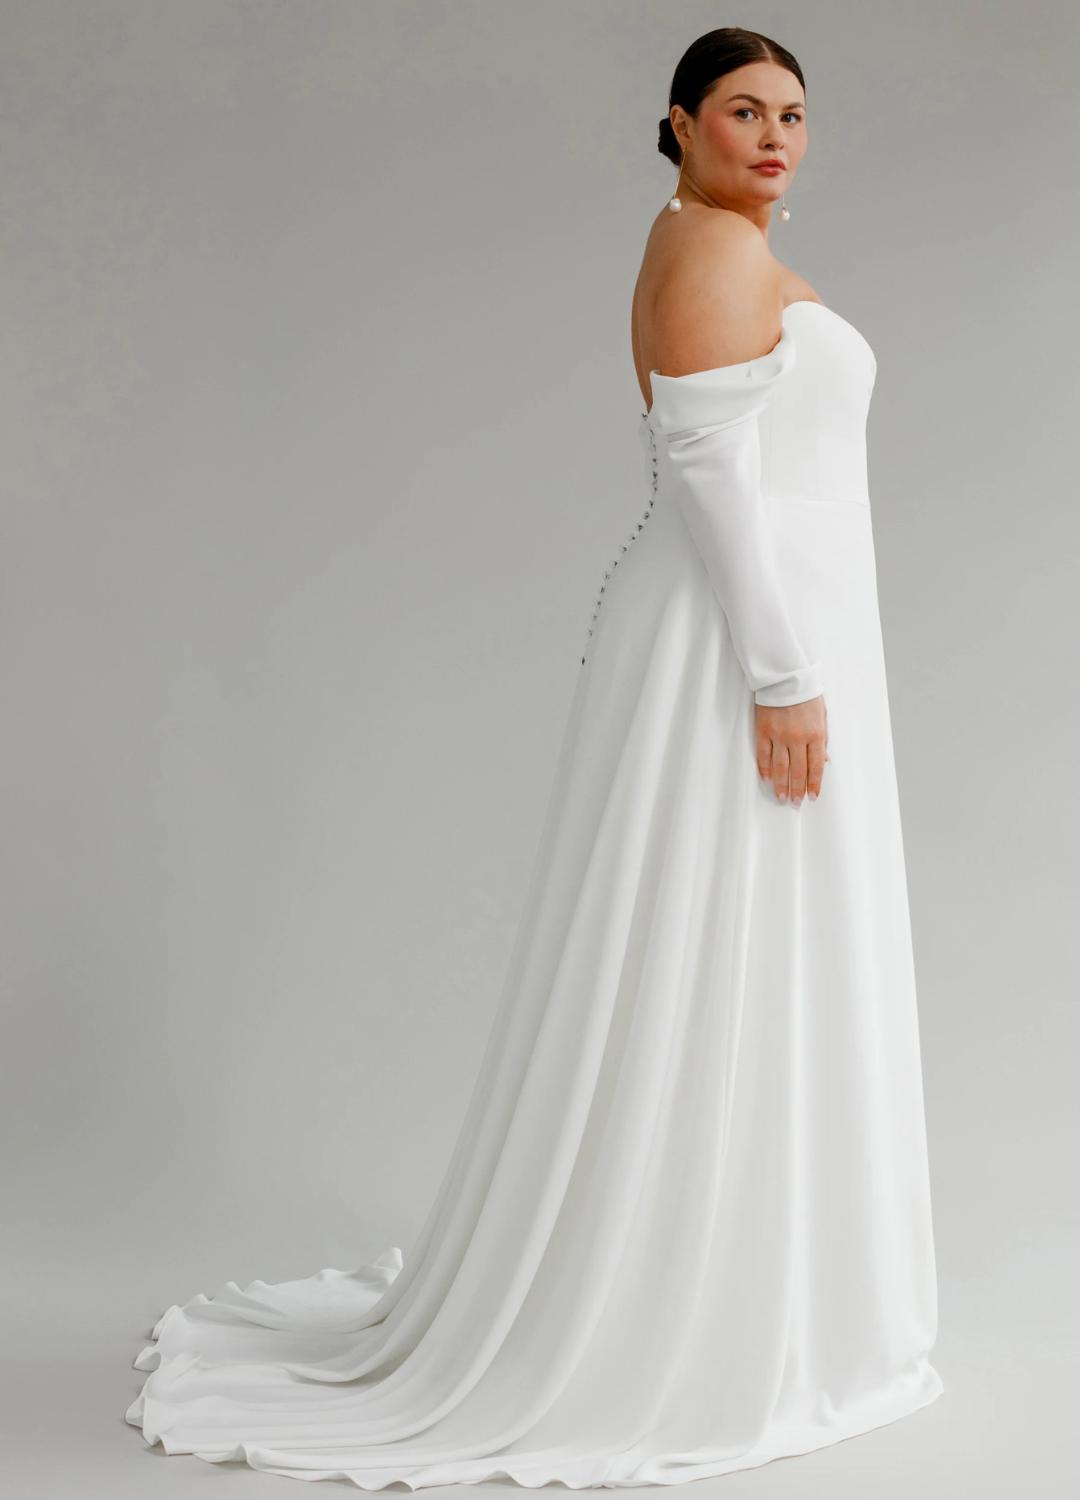 Simple wedding dress with long sleeves